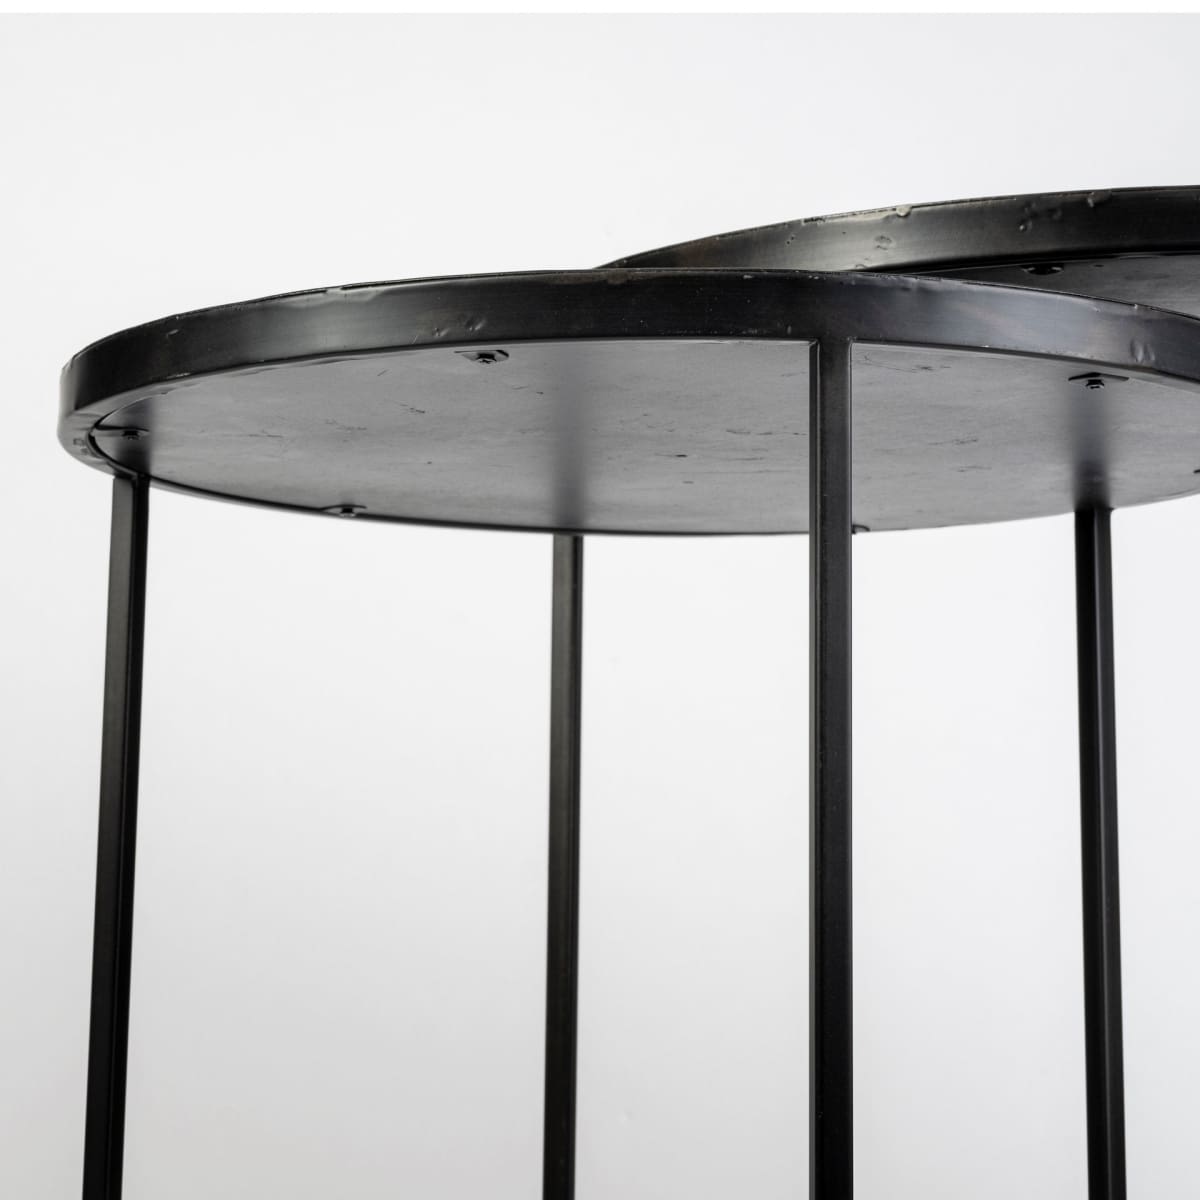 Chakra Accent Table Black Wood | Black Metal - accent-tables